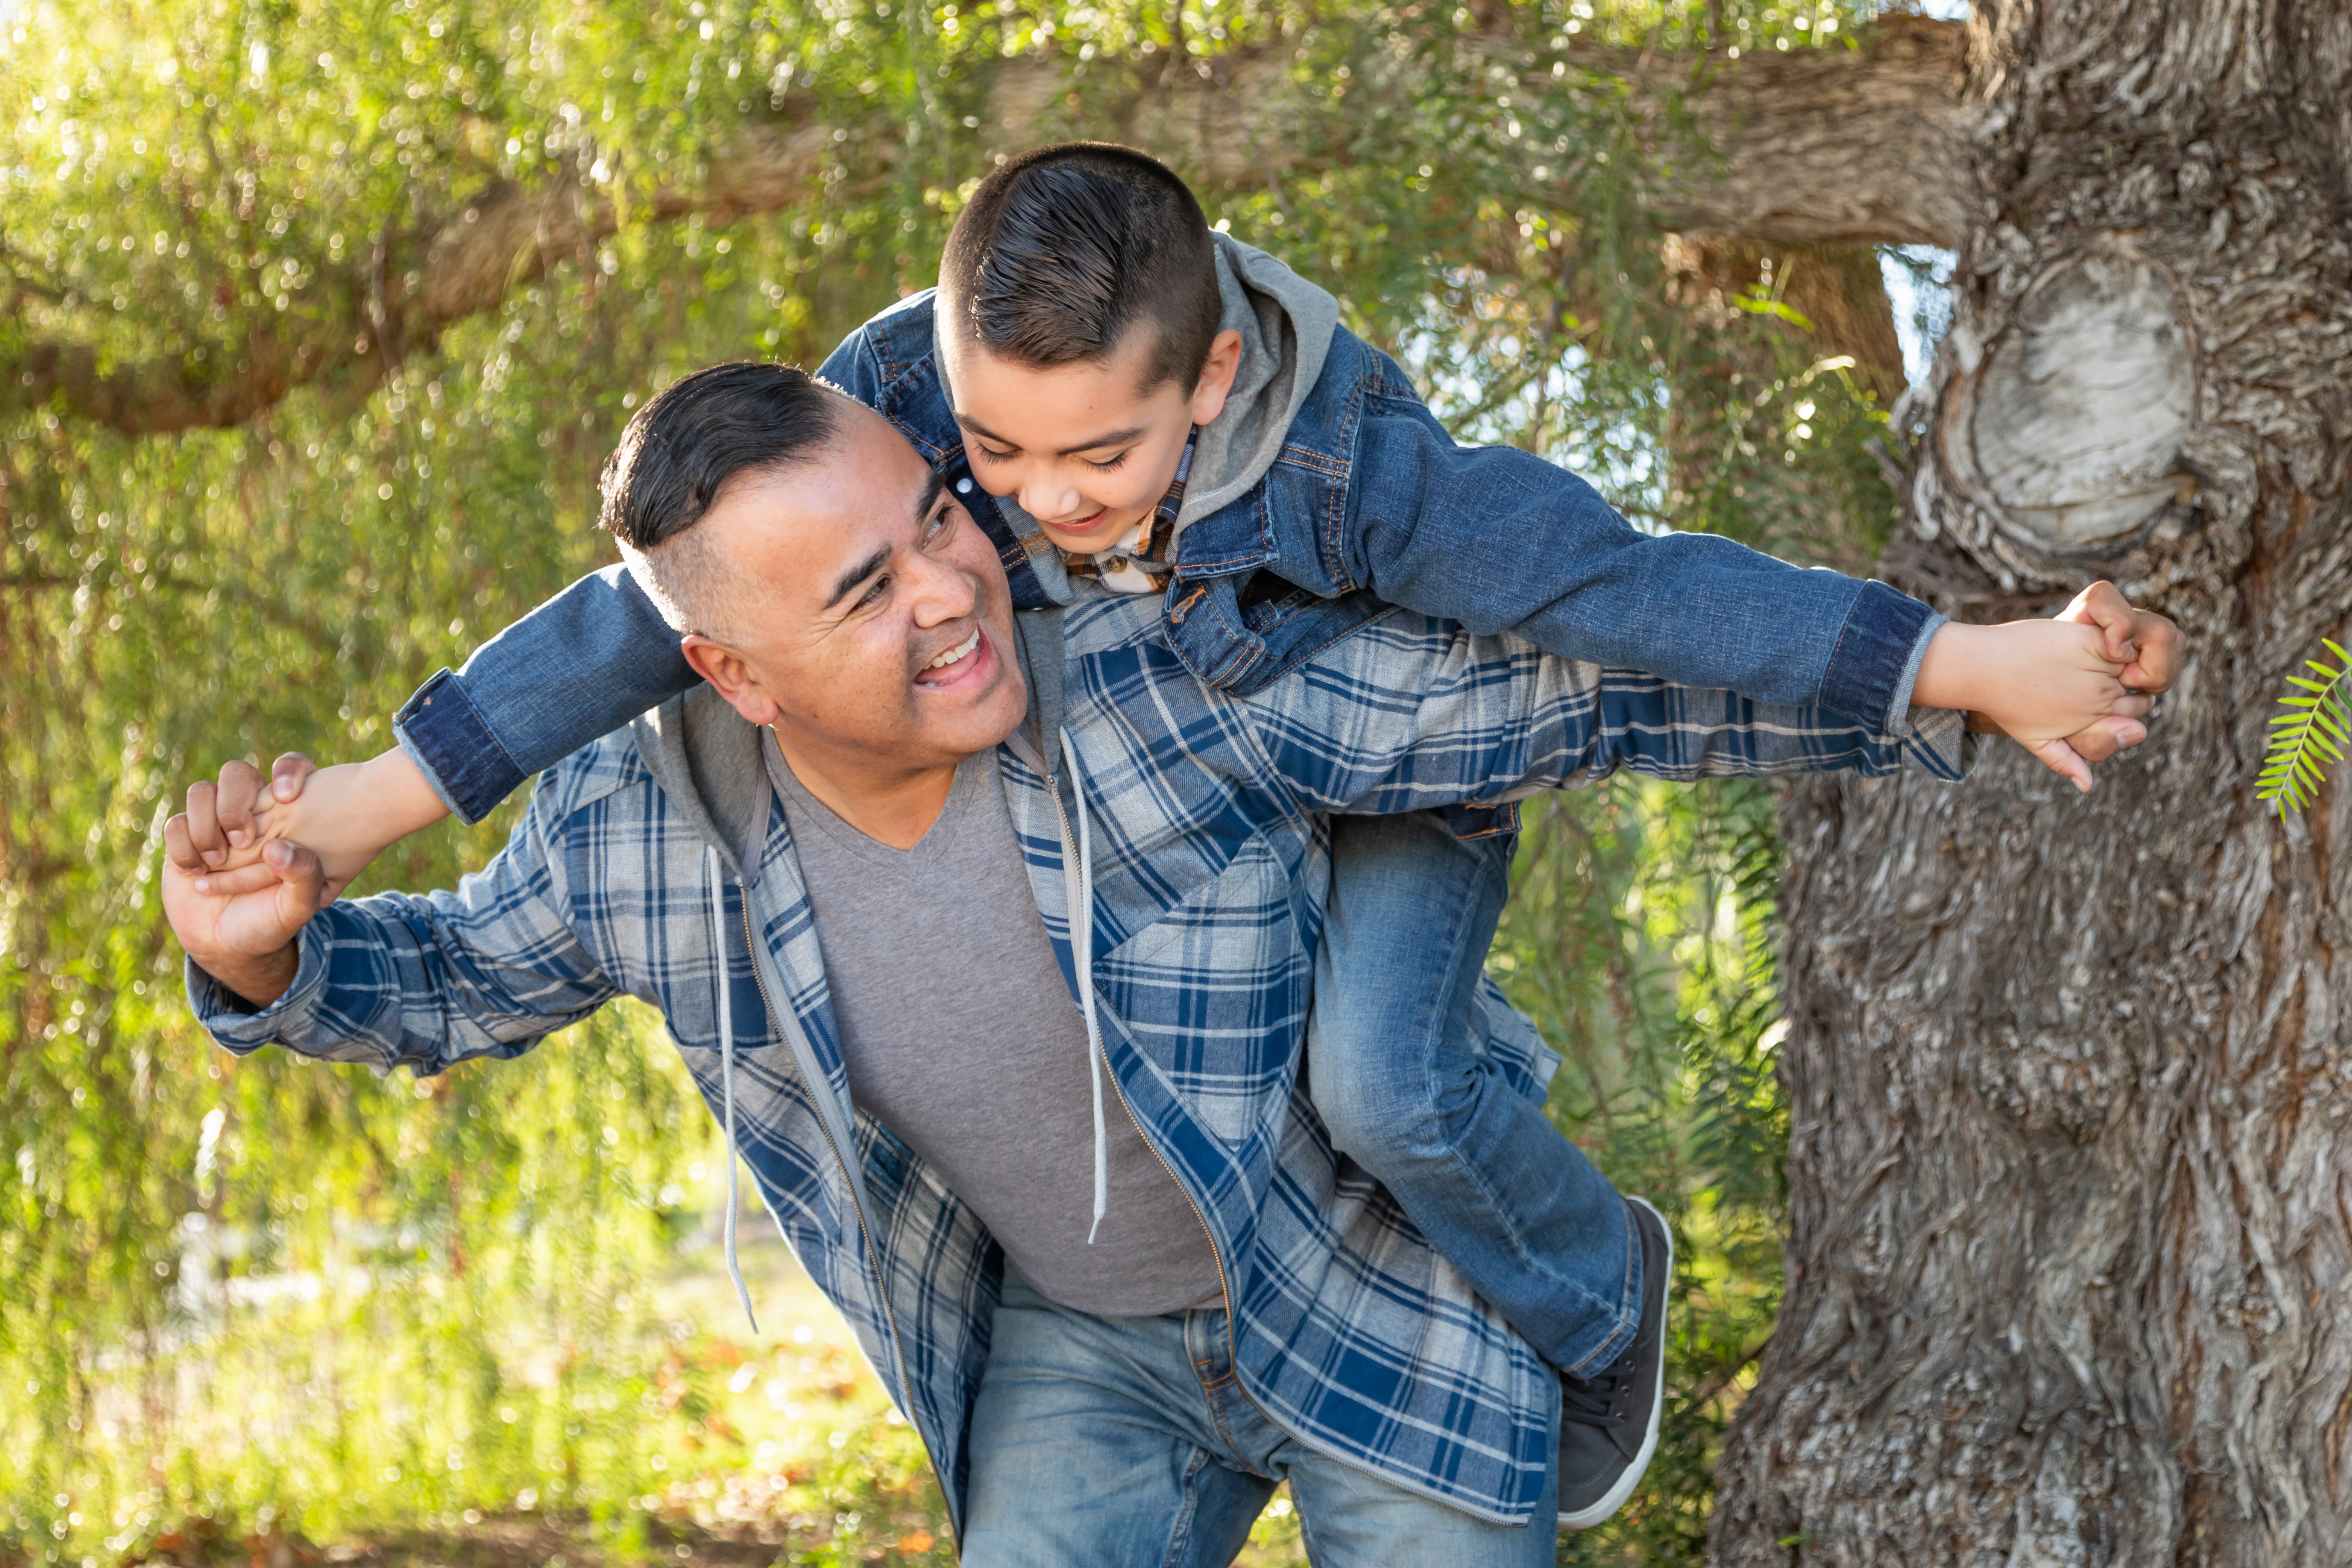 A boy rides on his dad's back in a park